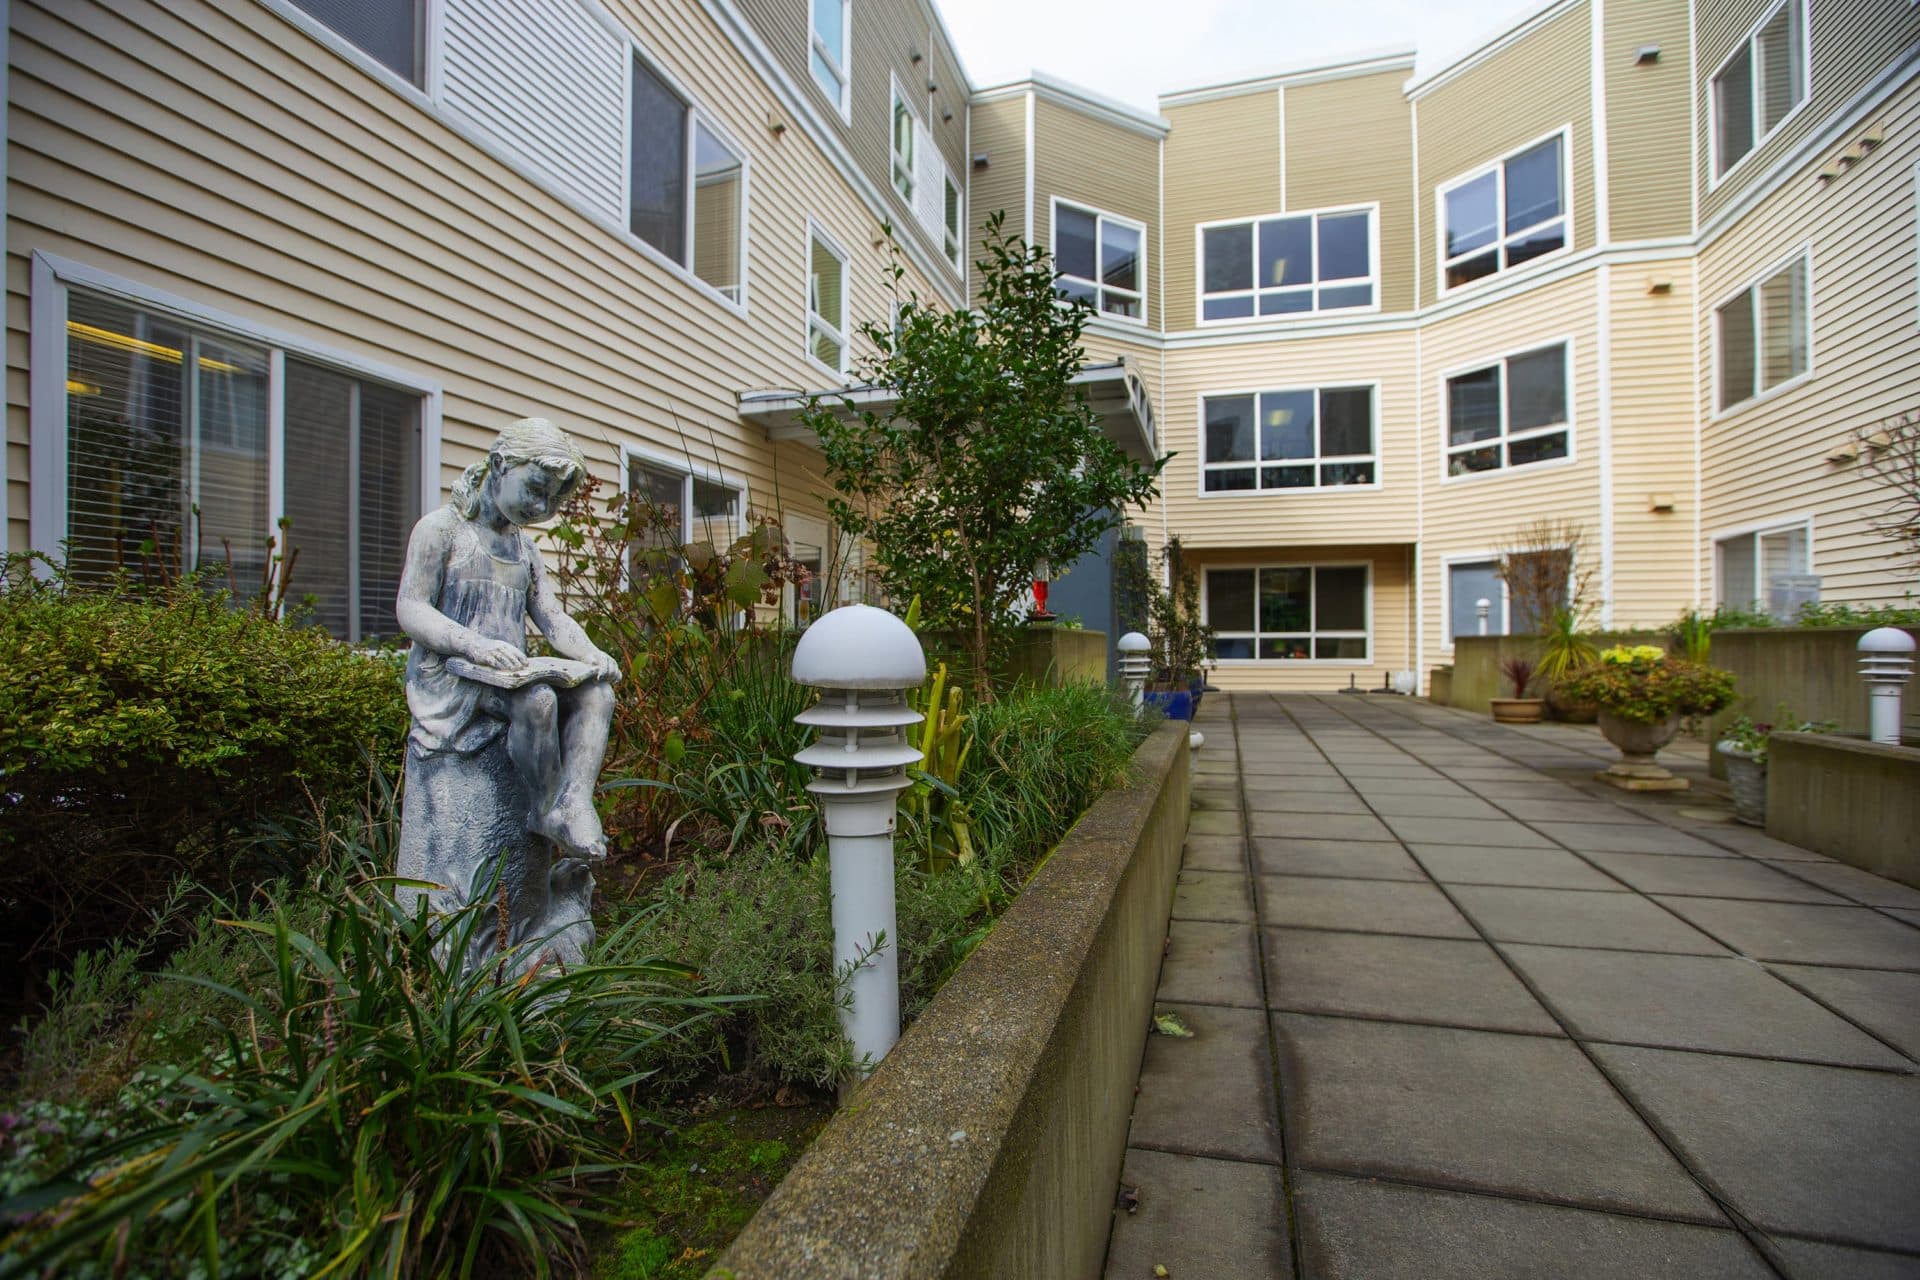 The Ashwood Court low-income housing apartments in downtown Bellevue photographed on March 2. (Mike Siegel for WBUR)